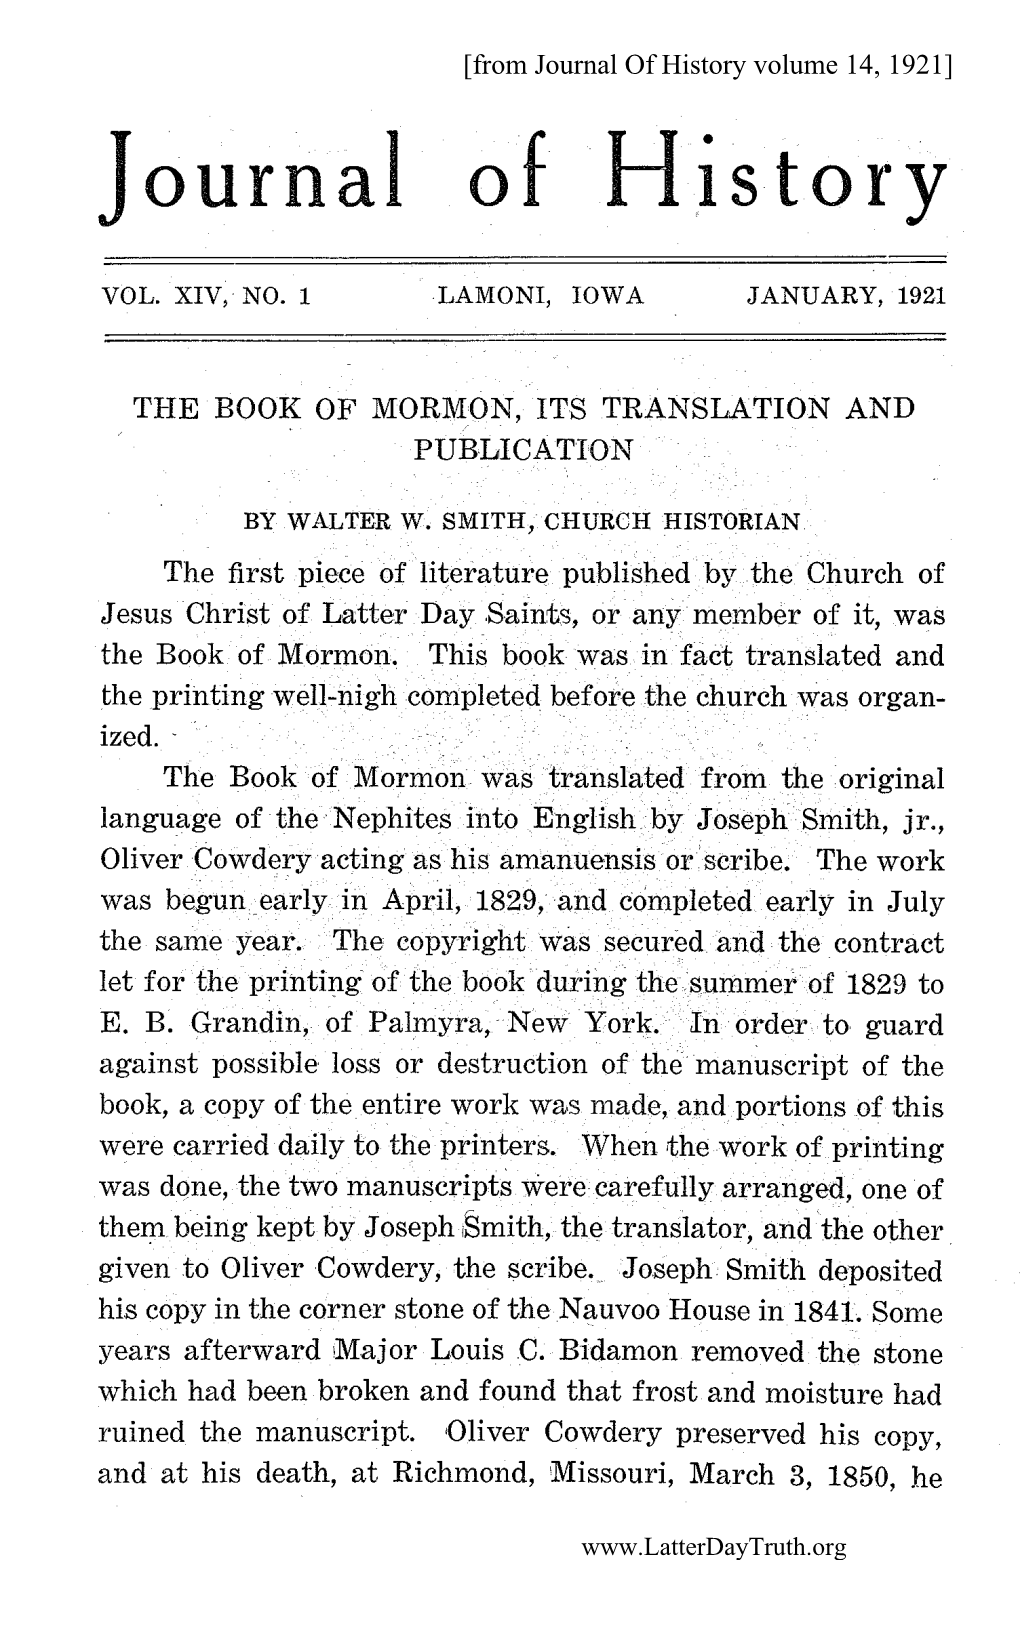 The Book of Mormon, Its Translation and Publication